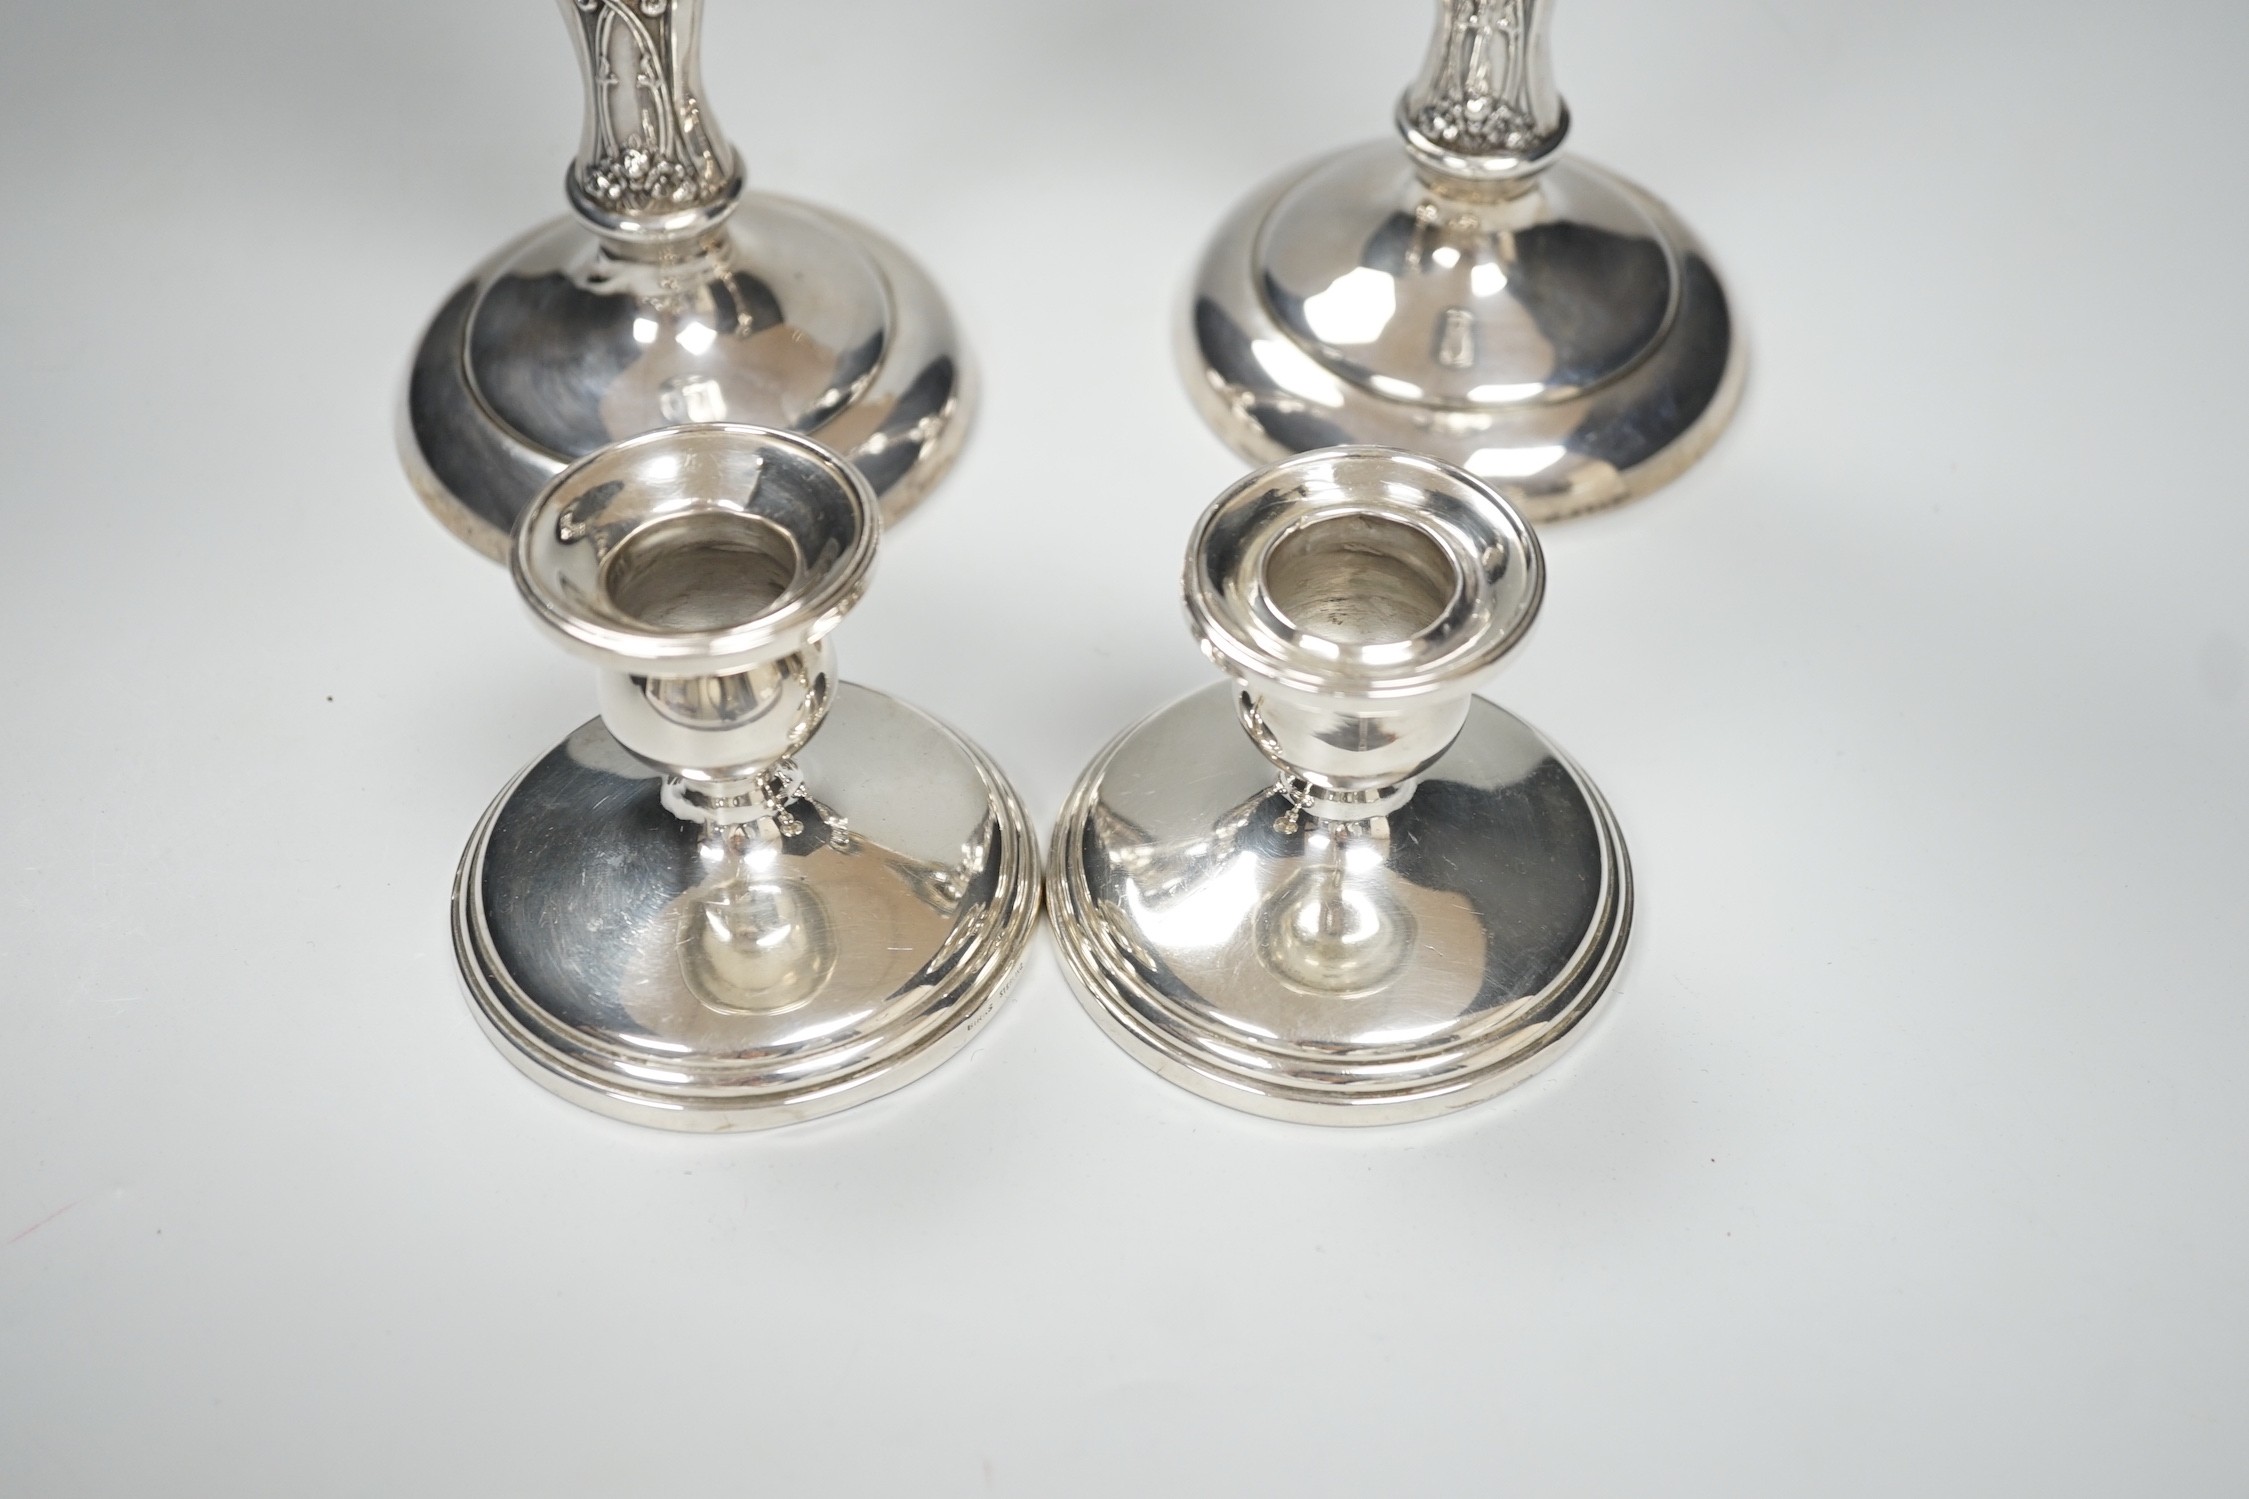 A pair of ornate sterling mounted candlesticks, 20.3cm, weighted and a pair of silver mounted dwarf candlesticks, 68mm, weighted.